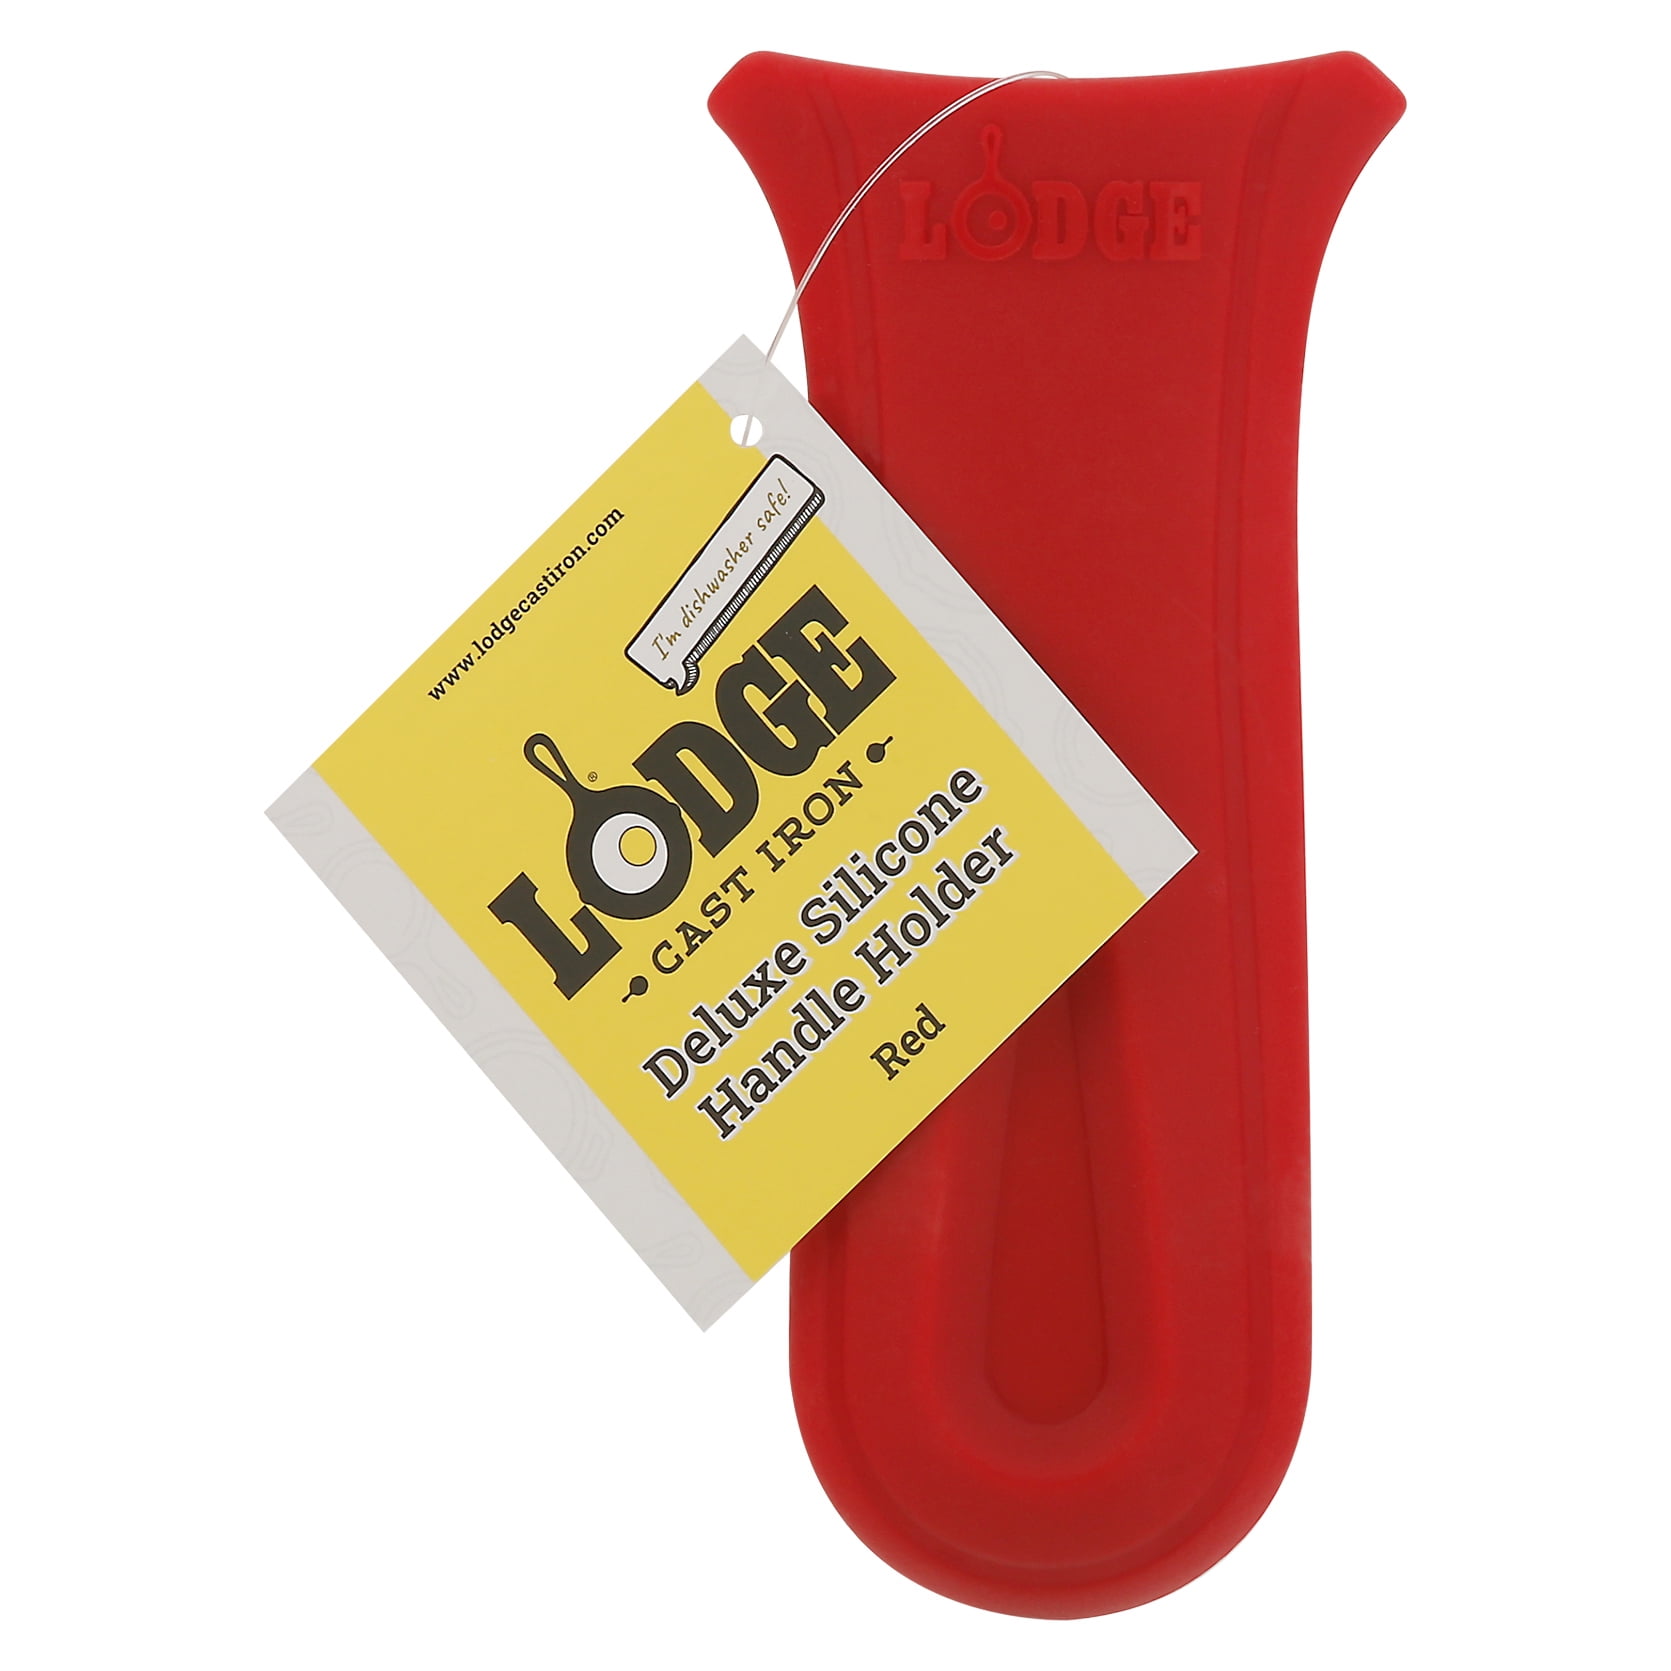  LODGE Red Silicone Deluxe Hot Handle Holder, 1 EA